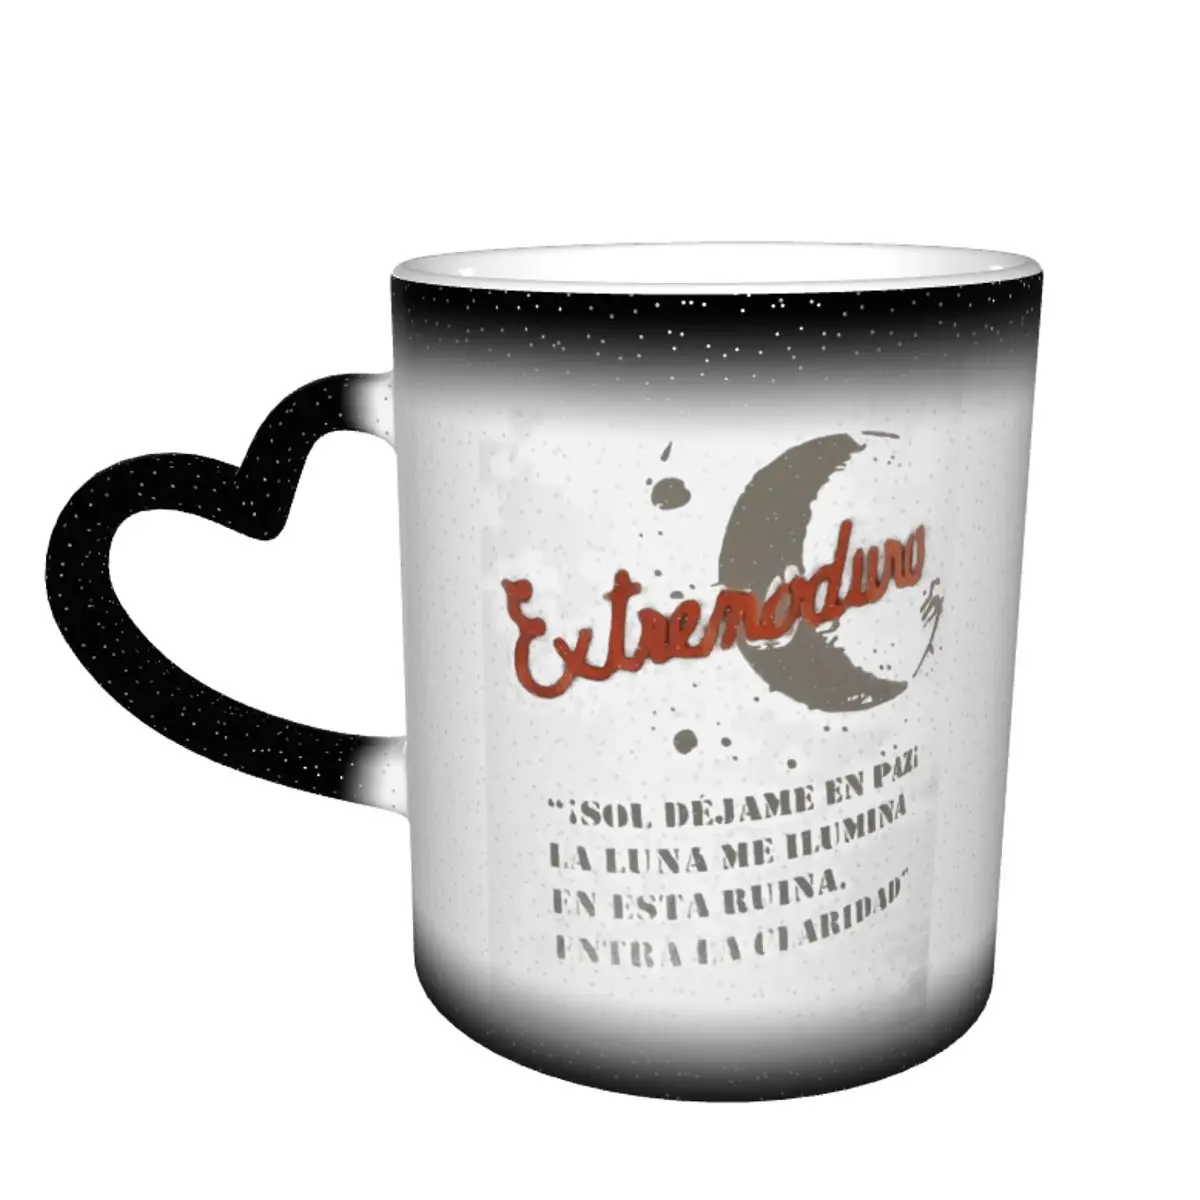 

Fondo Extremoduro Color Changing Mug in the Sky Funny Ceramic Heat-sensitive Cup Funny Novelty R251 Coffee cups